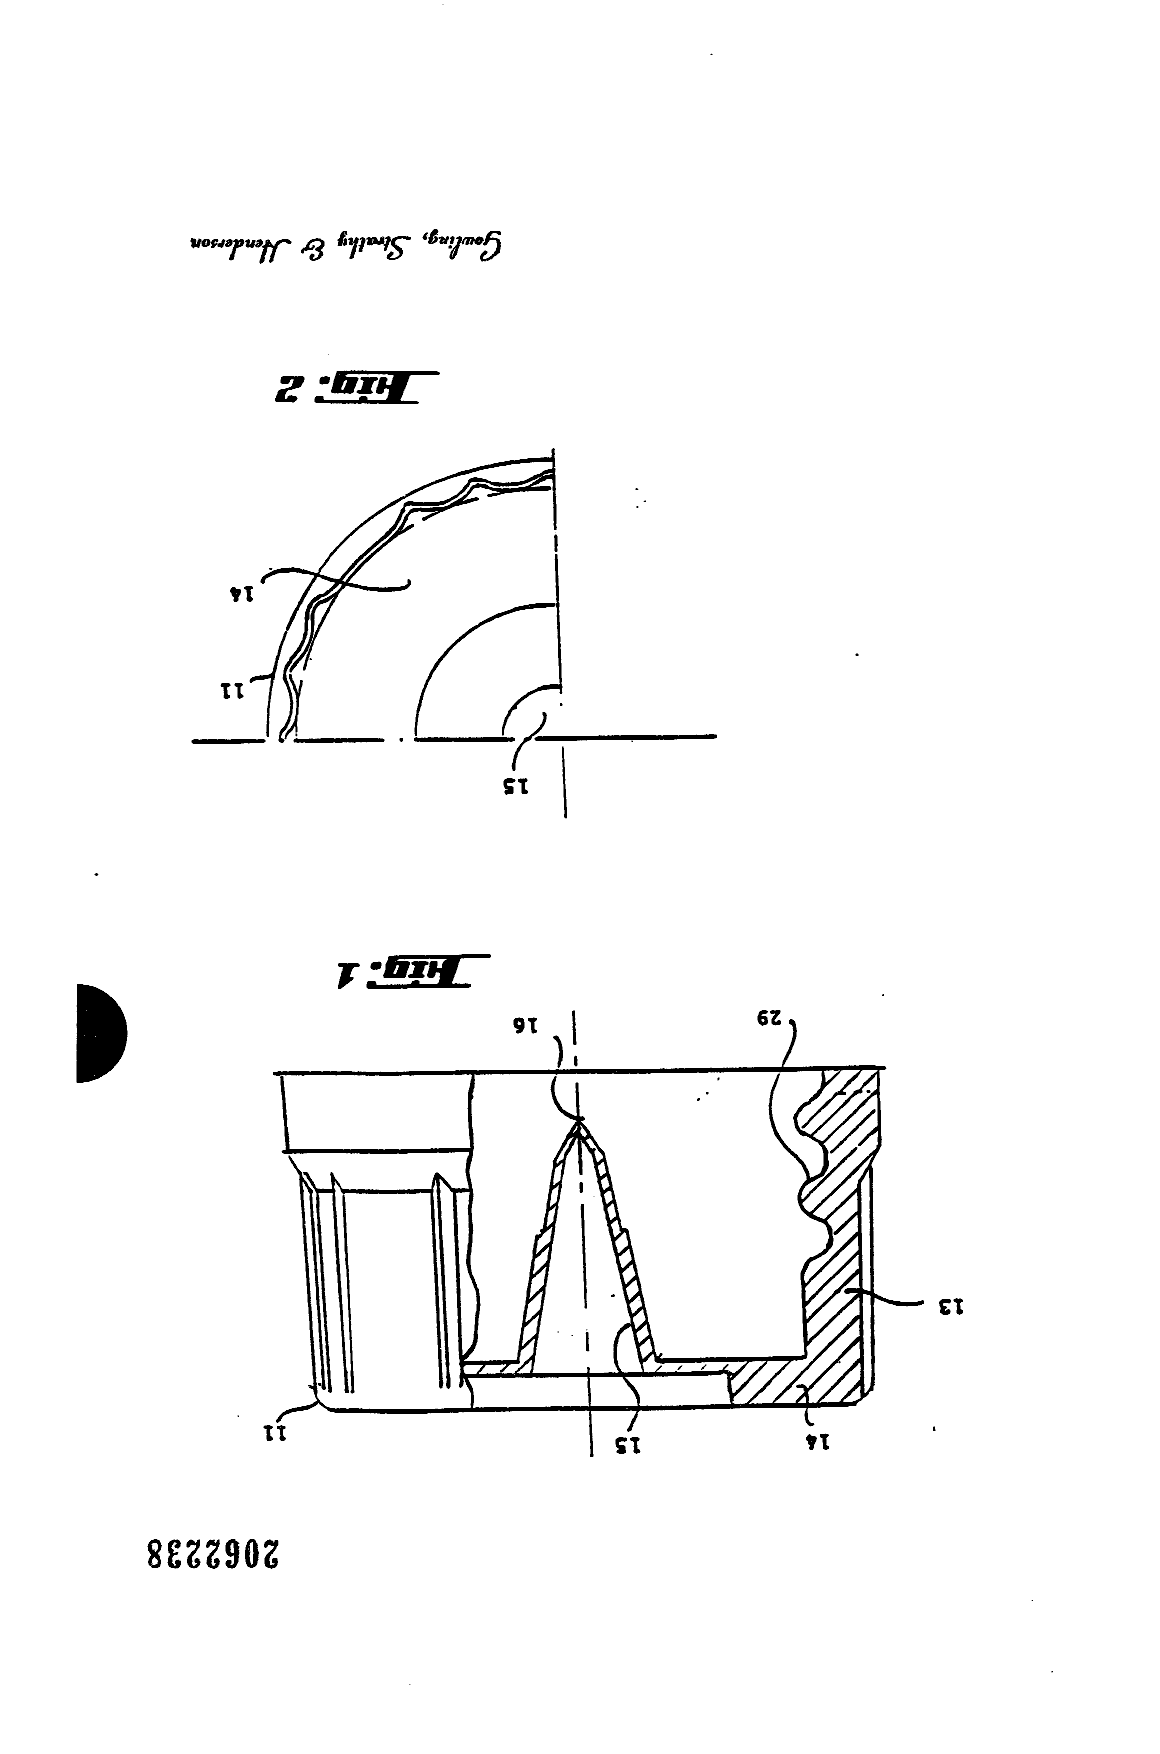 Canadian Patent Document 2062238. Drawings 19921220. Image 1 of 6